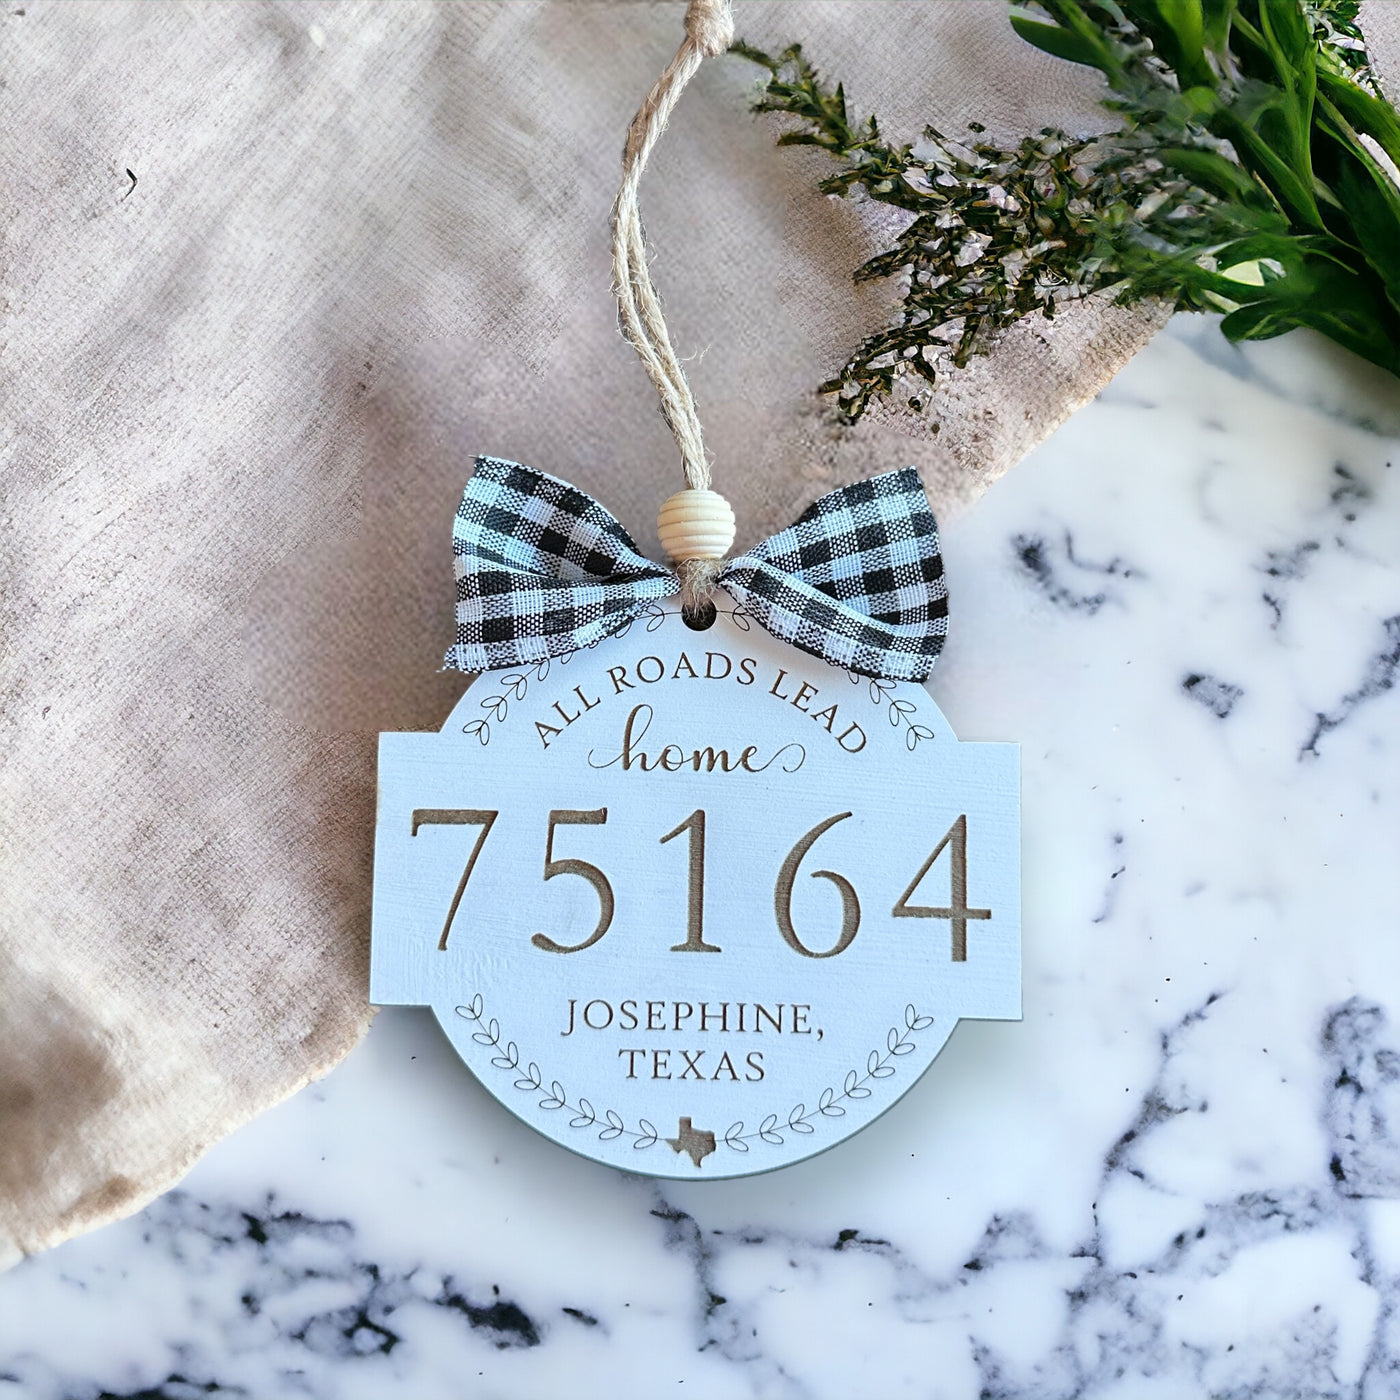 Josephine Texas Wooden Ornament-Brittany Carl-Shop Anchored Bliss Women's Boutique Clothing Store